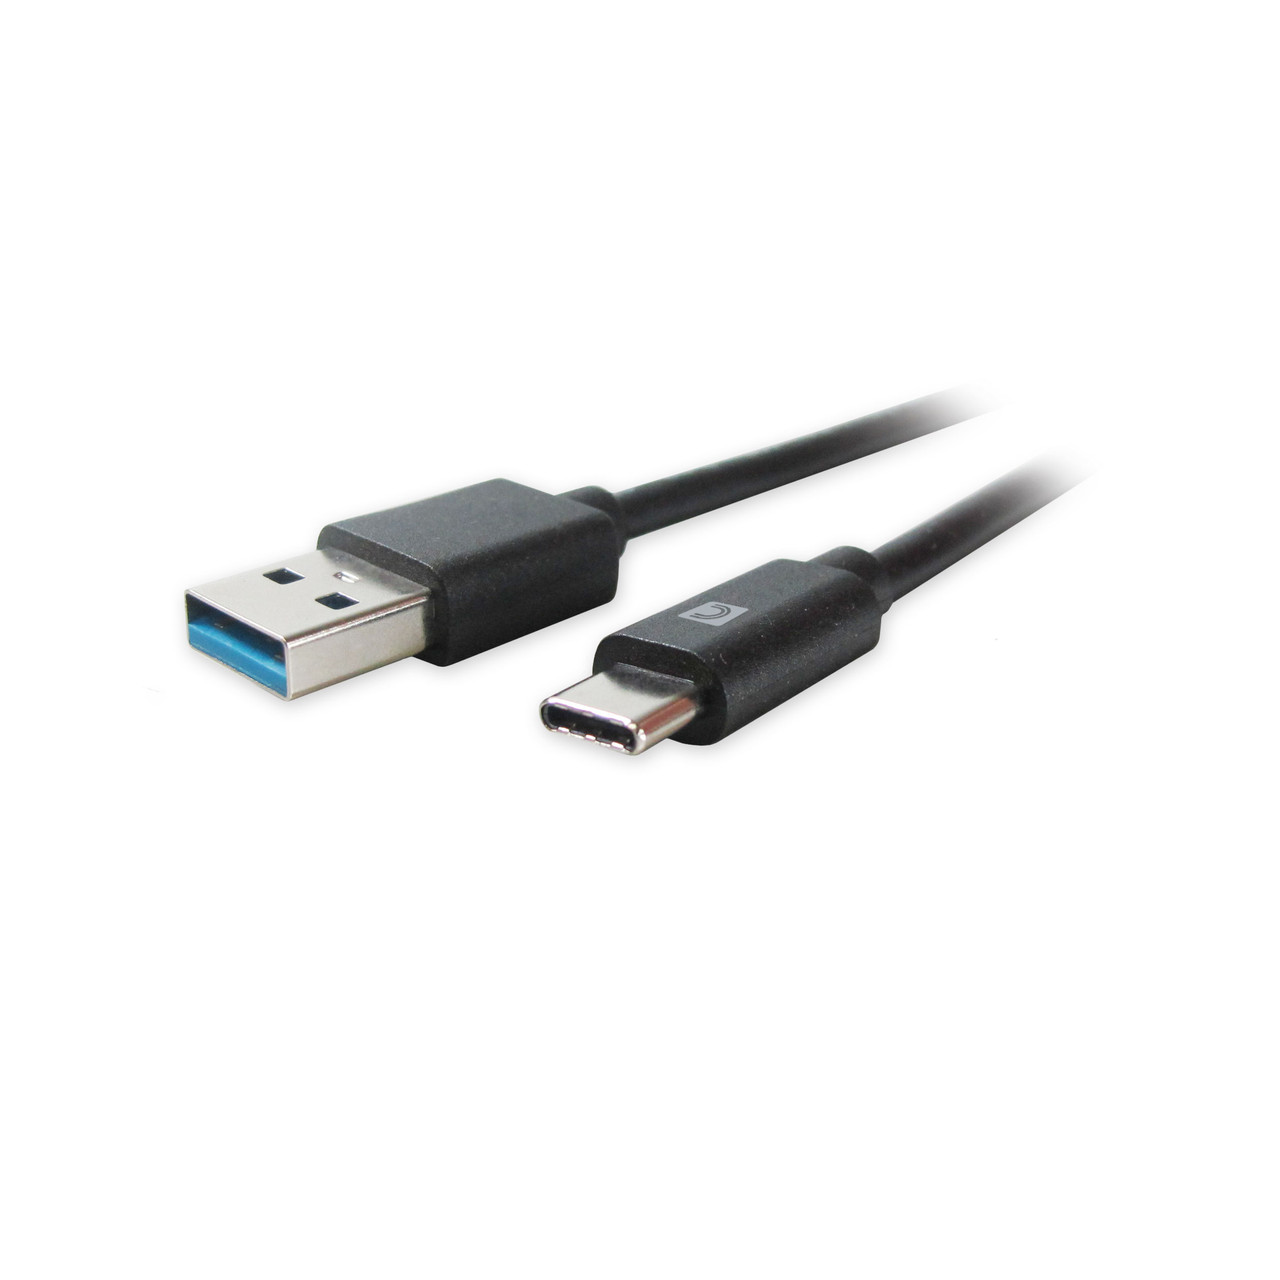  Cable Matters Long USB 3.0 Cable 10ft, USB to USB Cable/USB A  to USB A Cable/Male to Male USB Cord/Double USB Cord in Black : Electronics